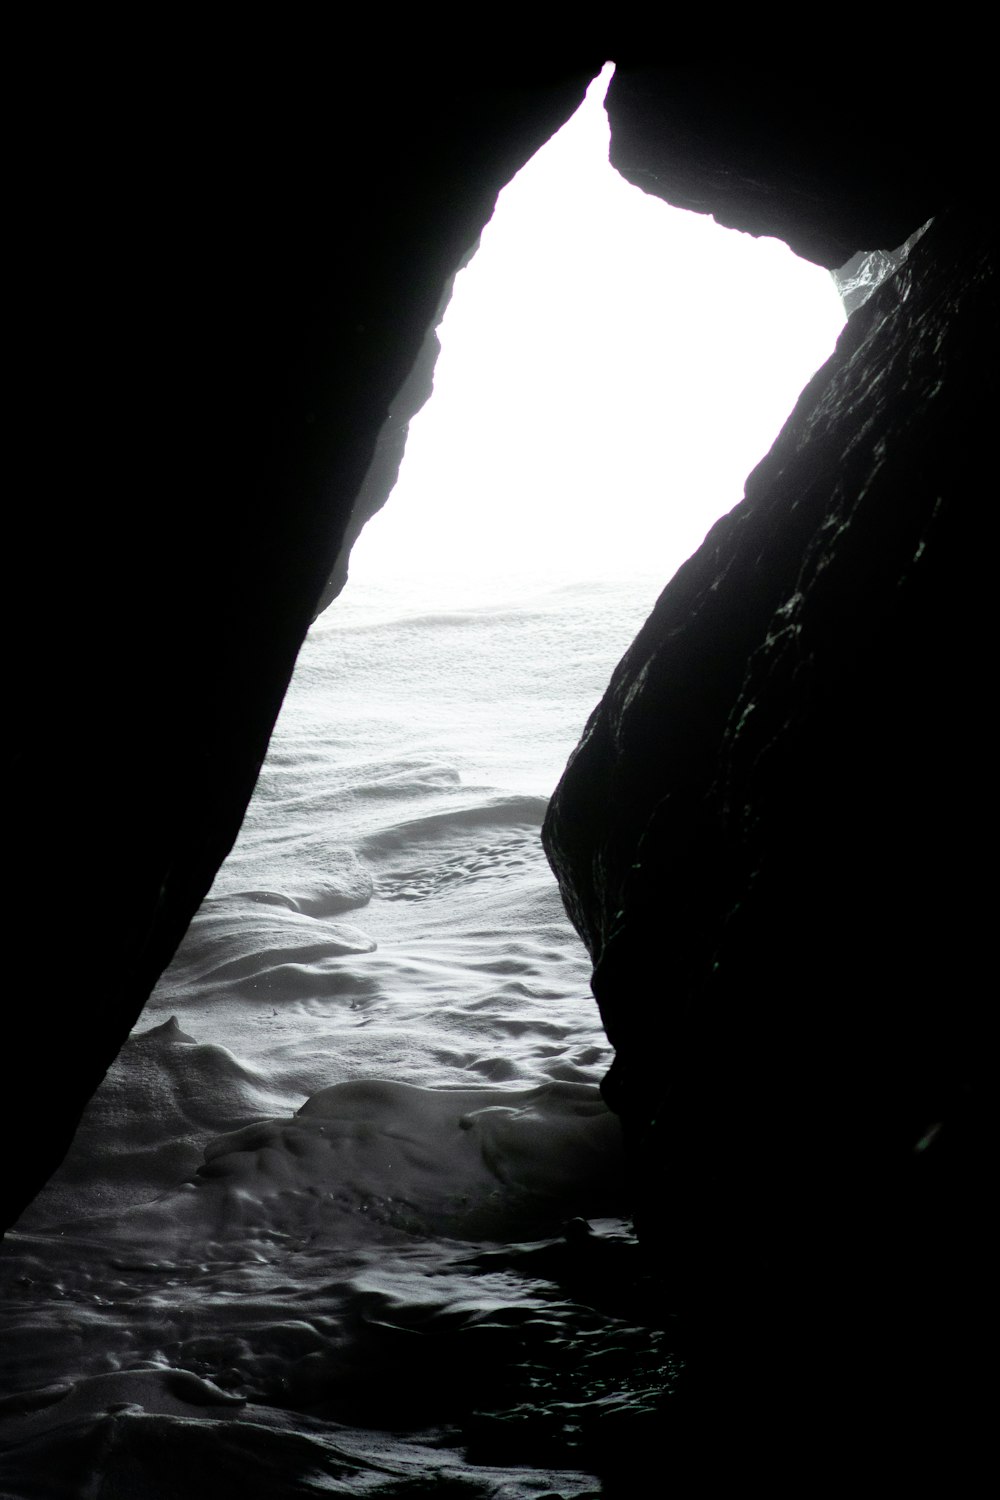 grayscale photo of cave near body of water